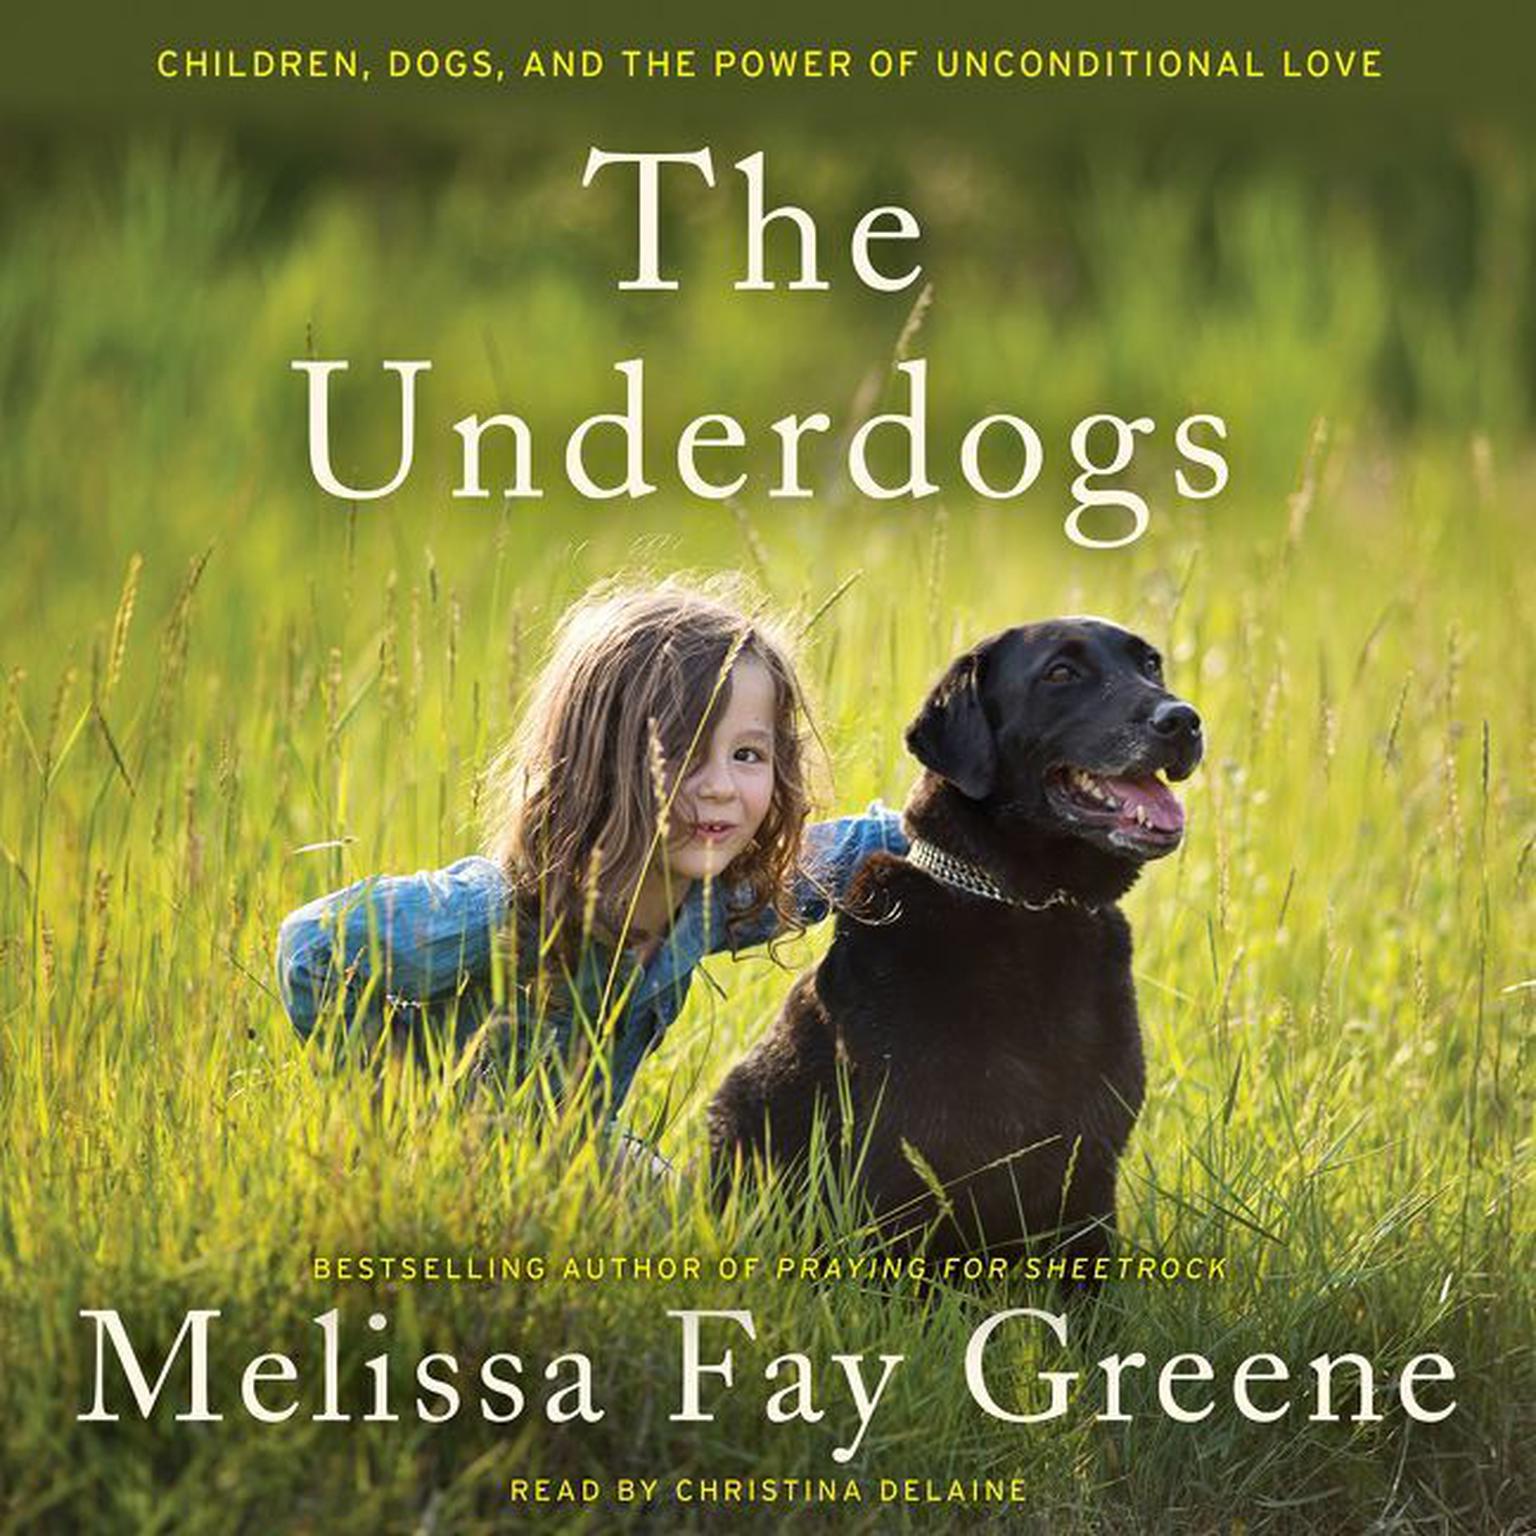 The Underdogs: Children, Dogs, and the Power of Unconditional Love Audiobook, by Melissa Fay Greene